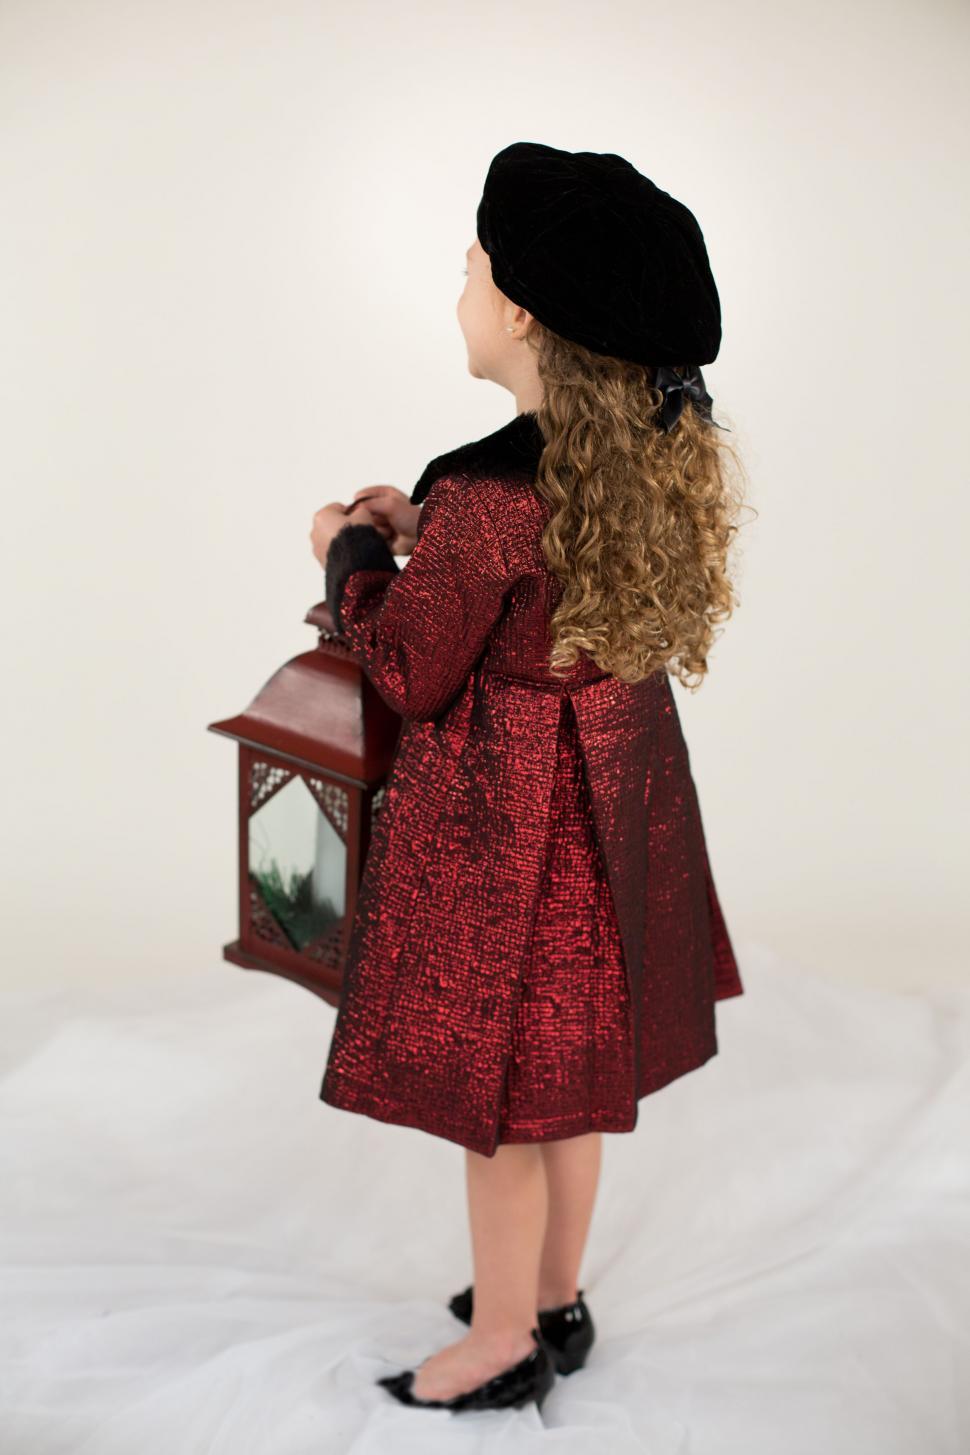 Free Image of Little girl in red sequin jacket with black cap  